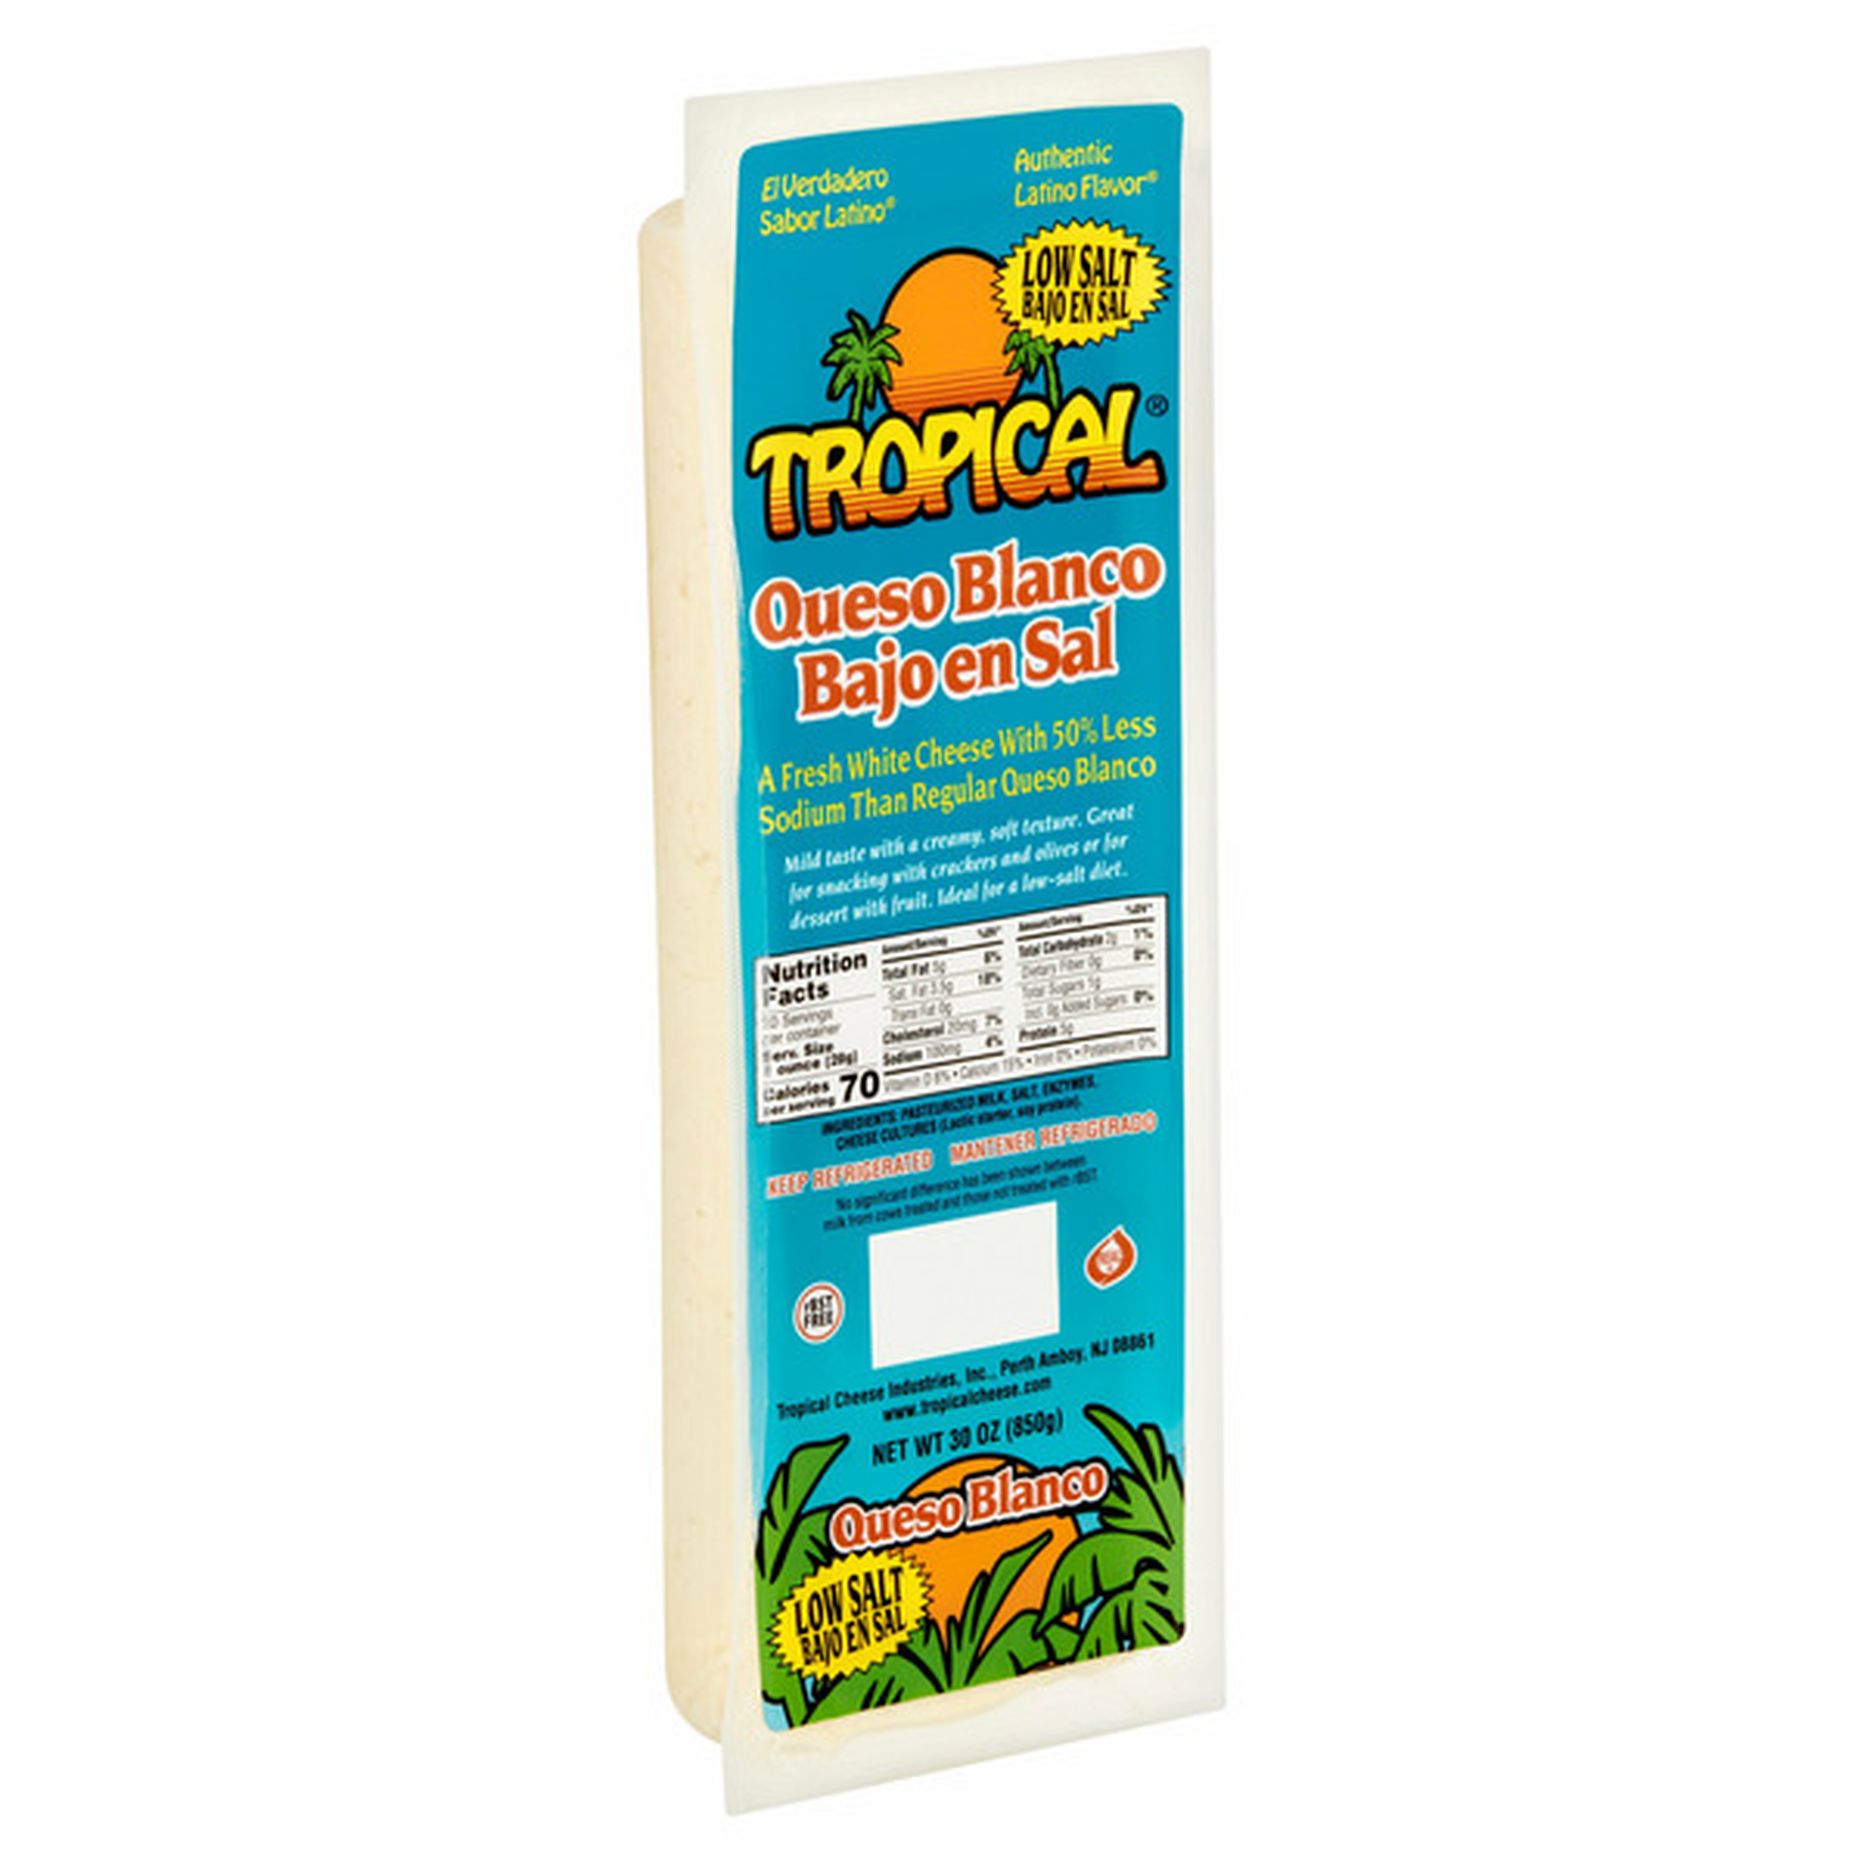 Tropical Queso Blanco Low Salt Fresh White Cheese (30 oz) Delivery or ...